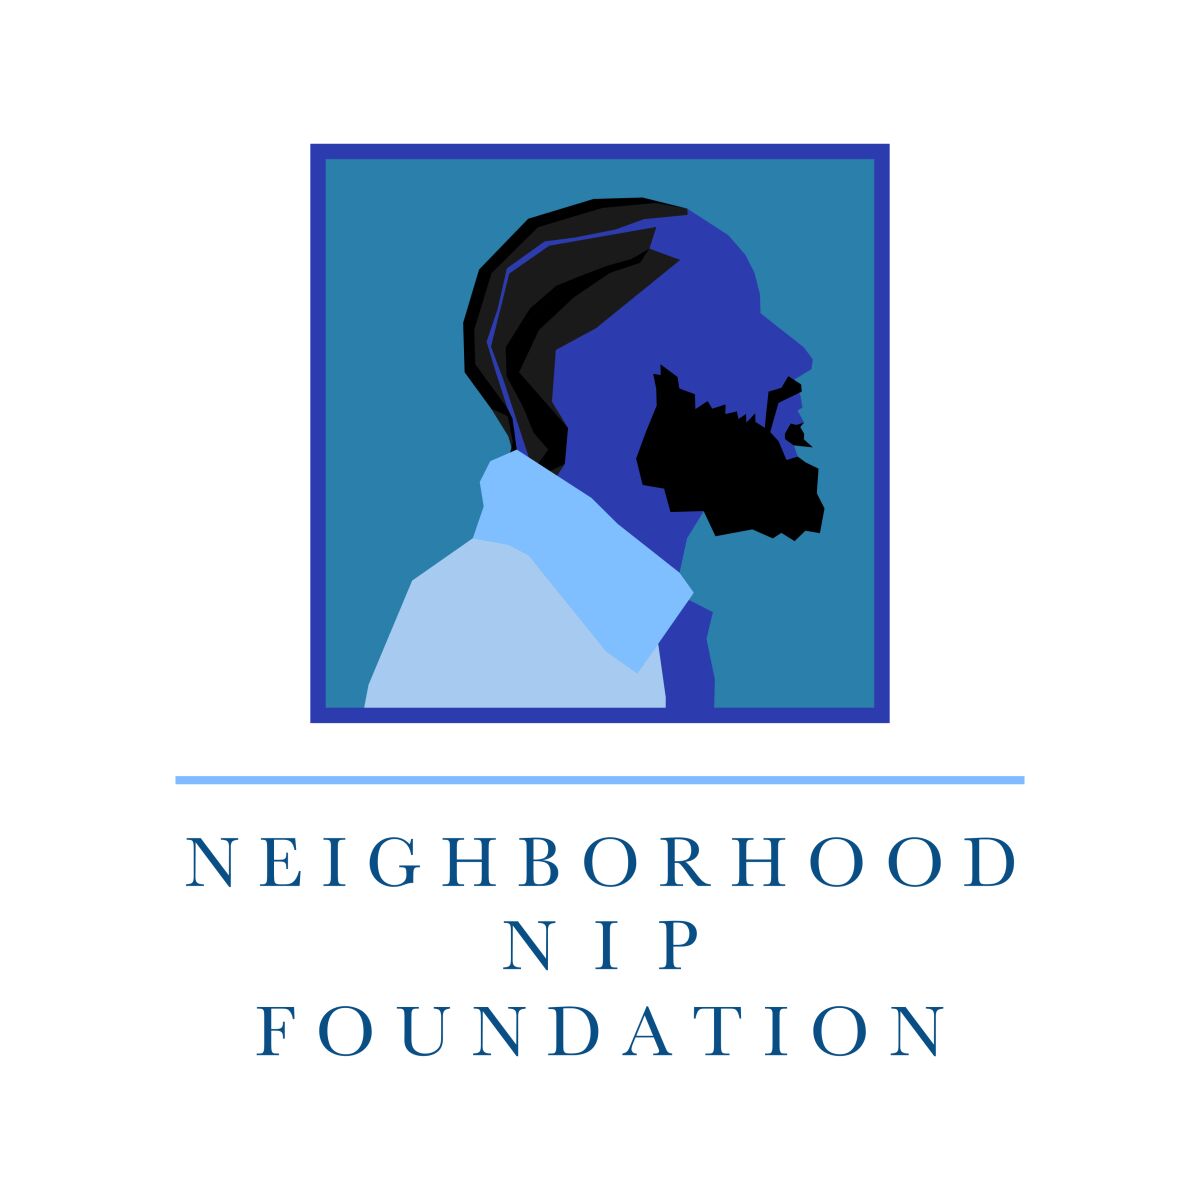 The family of Nipsey Hussle has launched the Neighborhood Nip Foundation to continue the late rapper and activist's mission to impact his community.